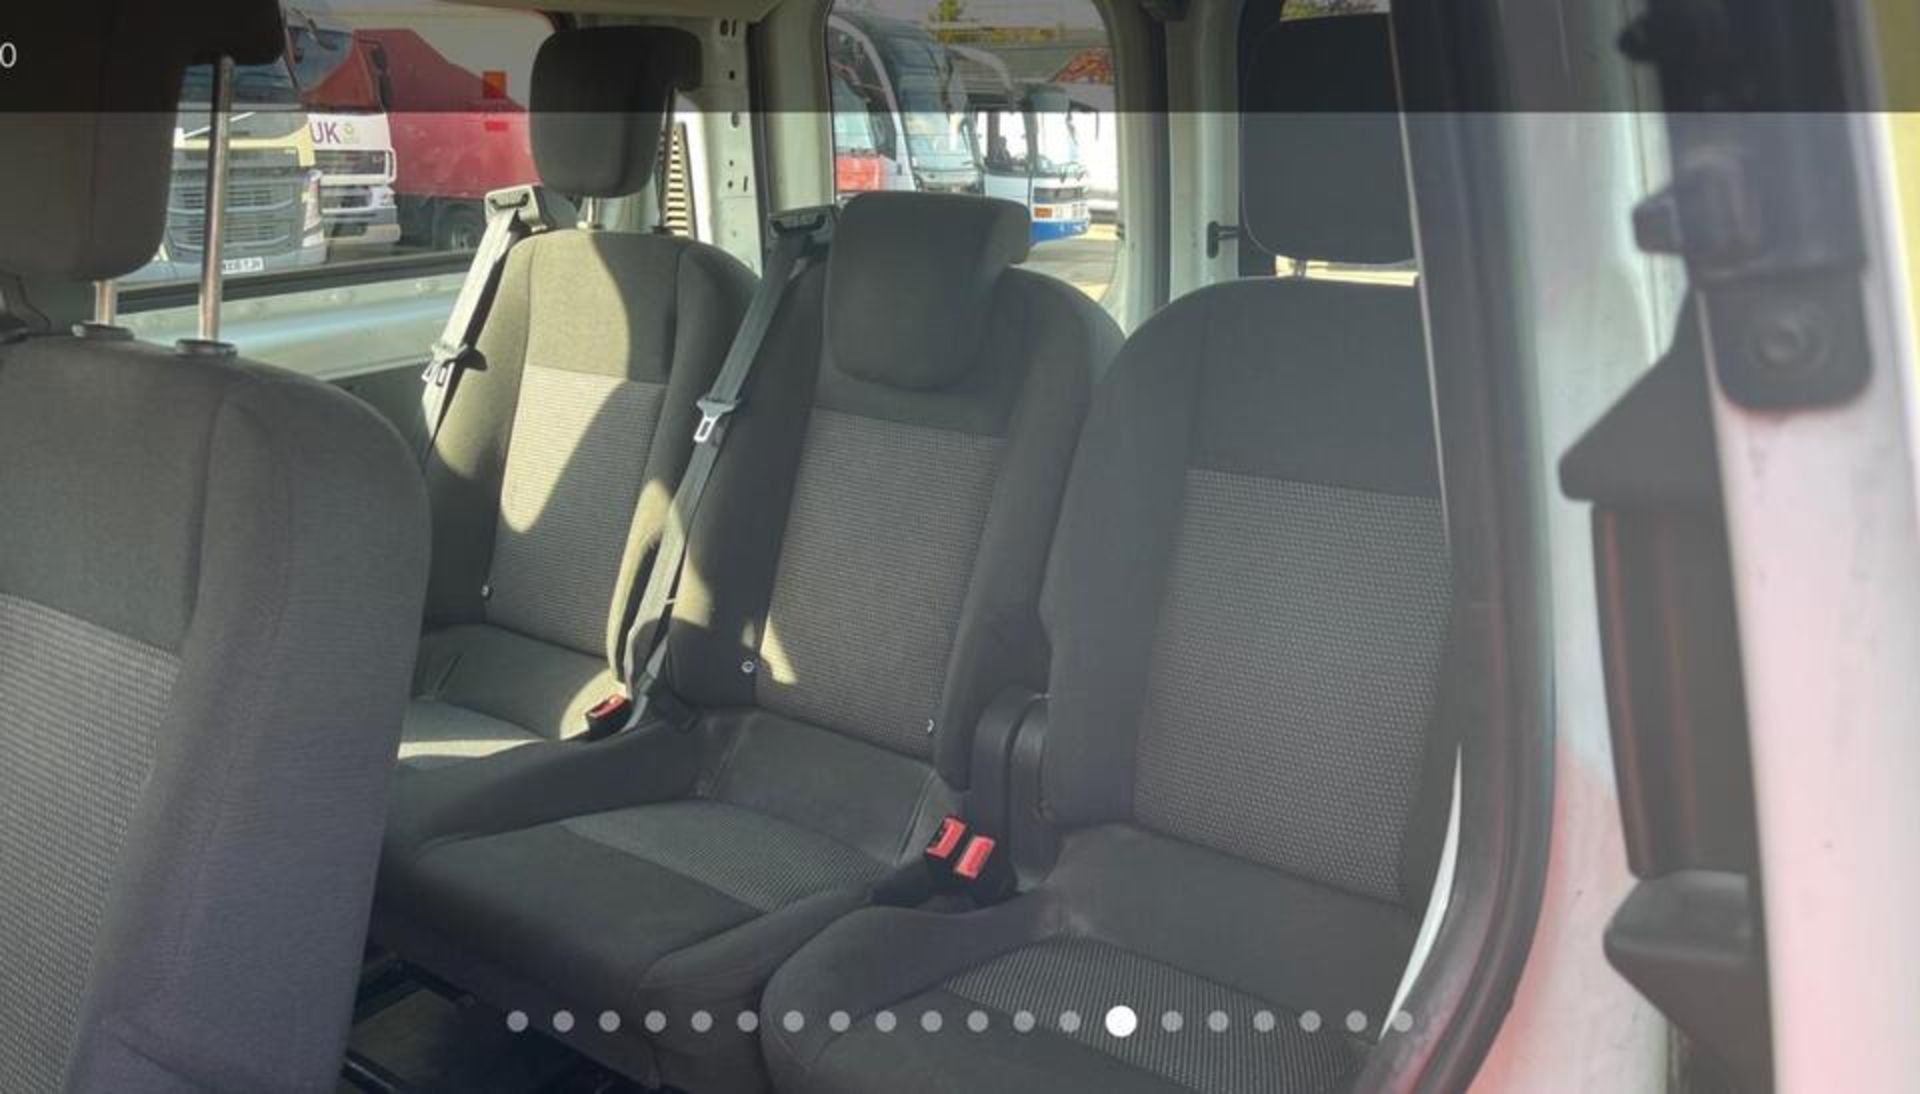 2014 FORD TRANSIT CUSTOM MINI BUS -170K MILES- HPI CLEAR- READY FOR ACTION! - Image 10 of 14